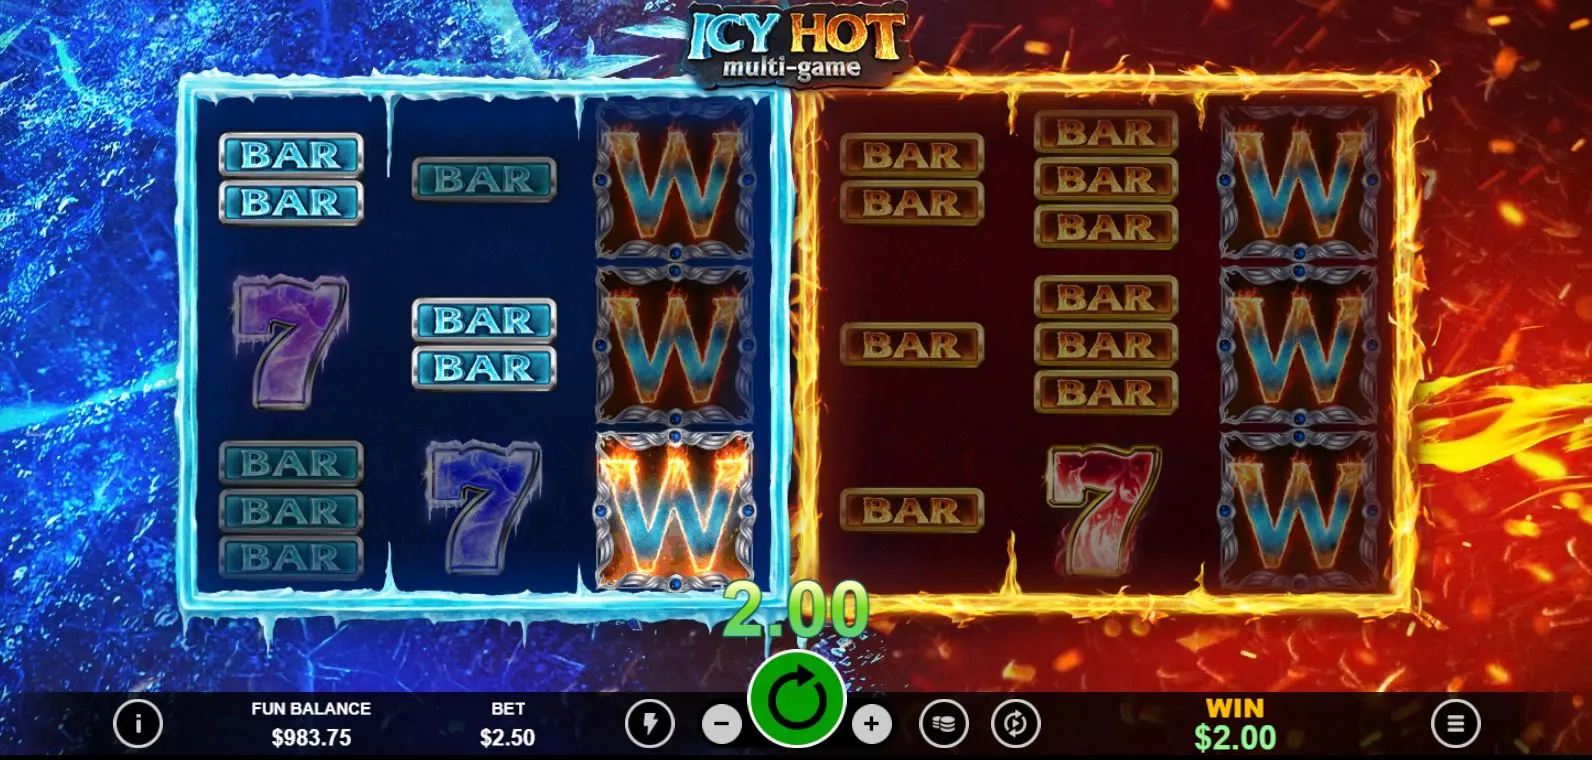 Icy Hot Multi-Game Transferring Wilds feature